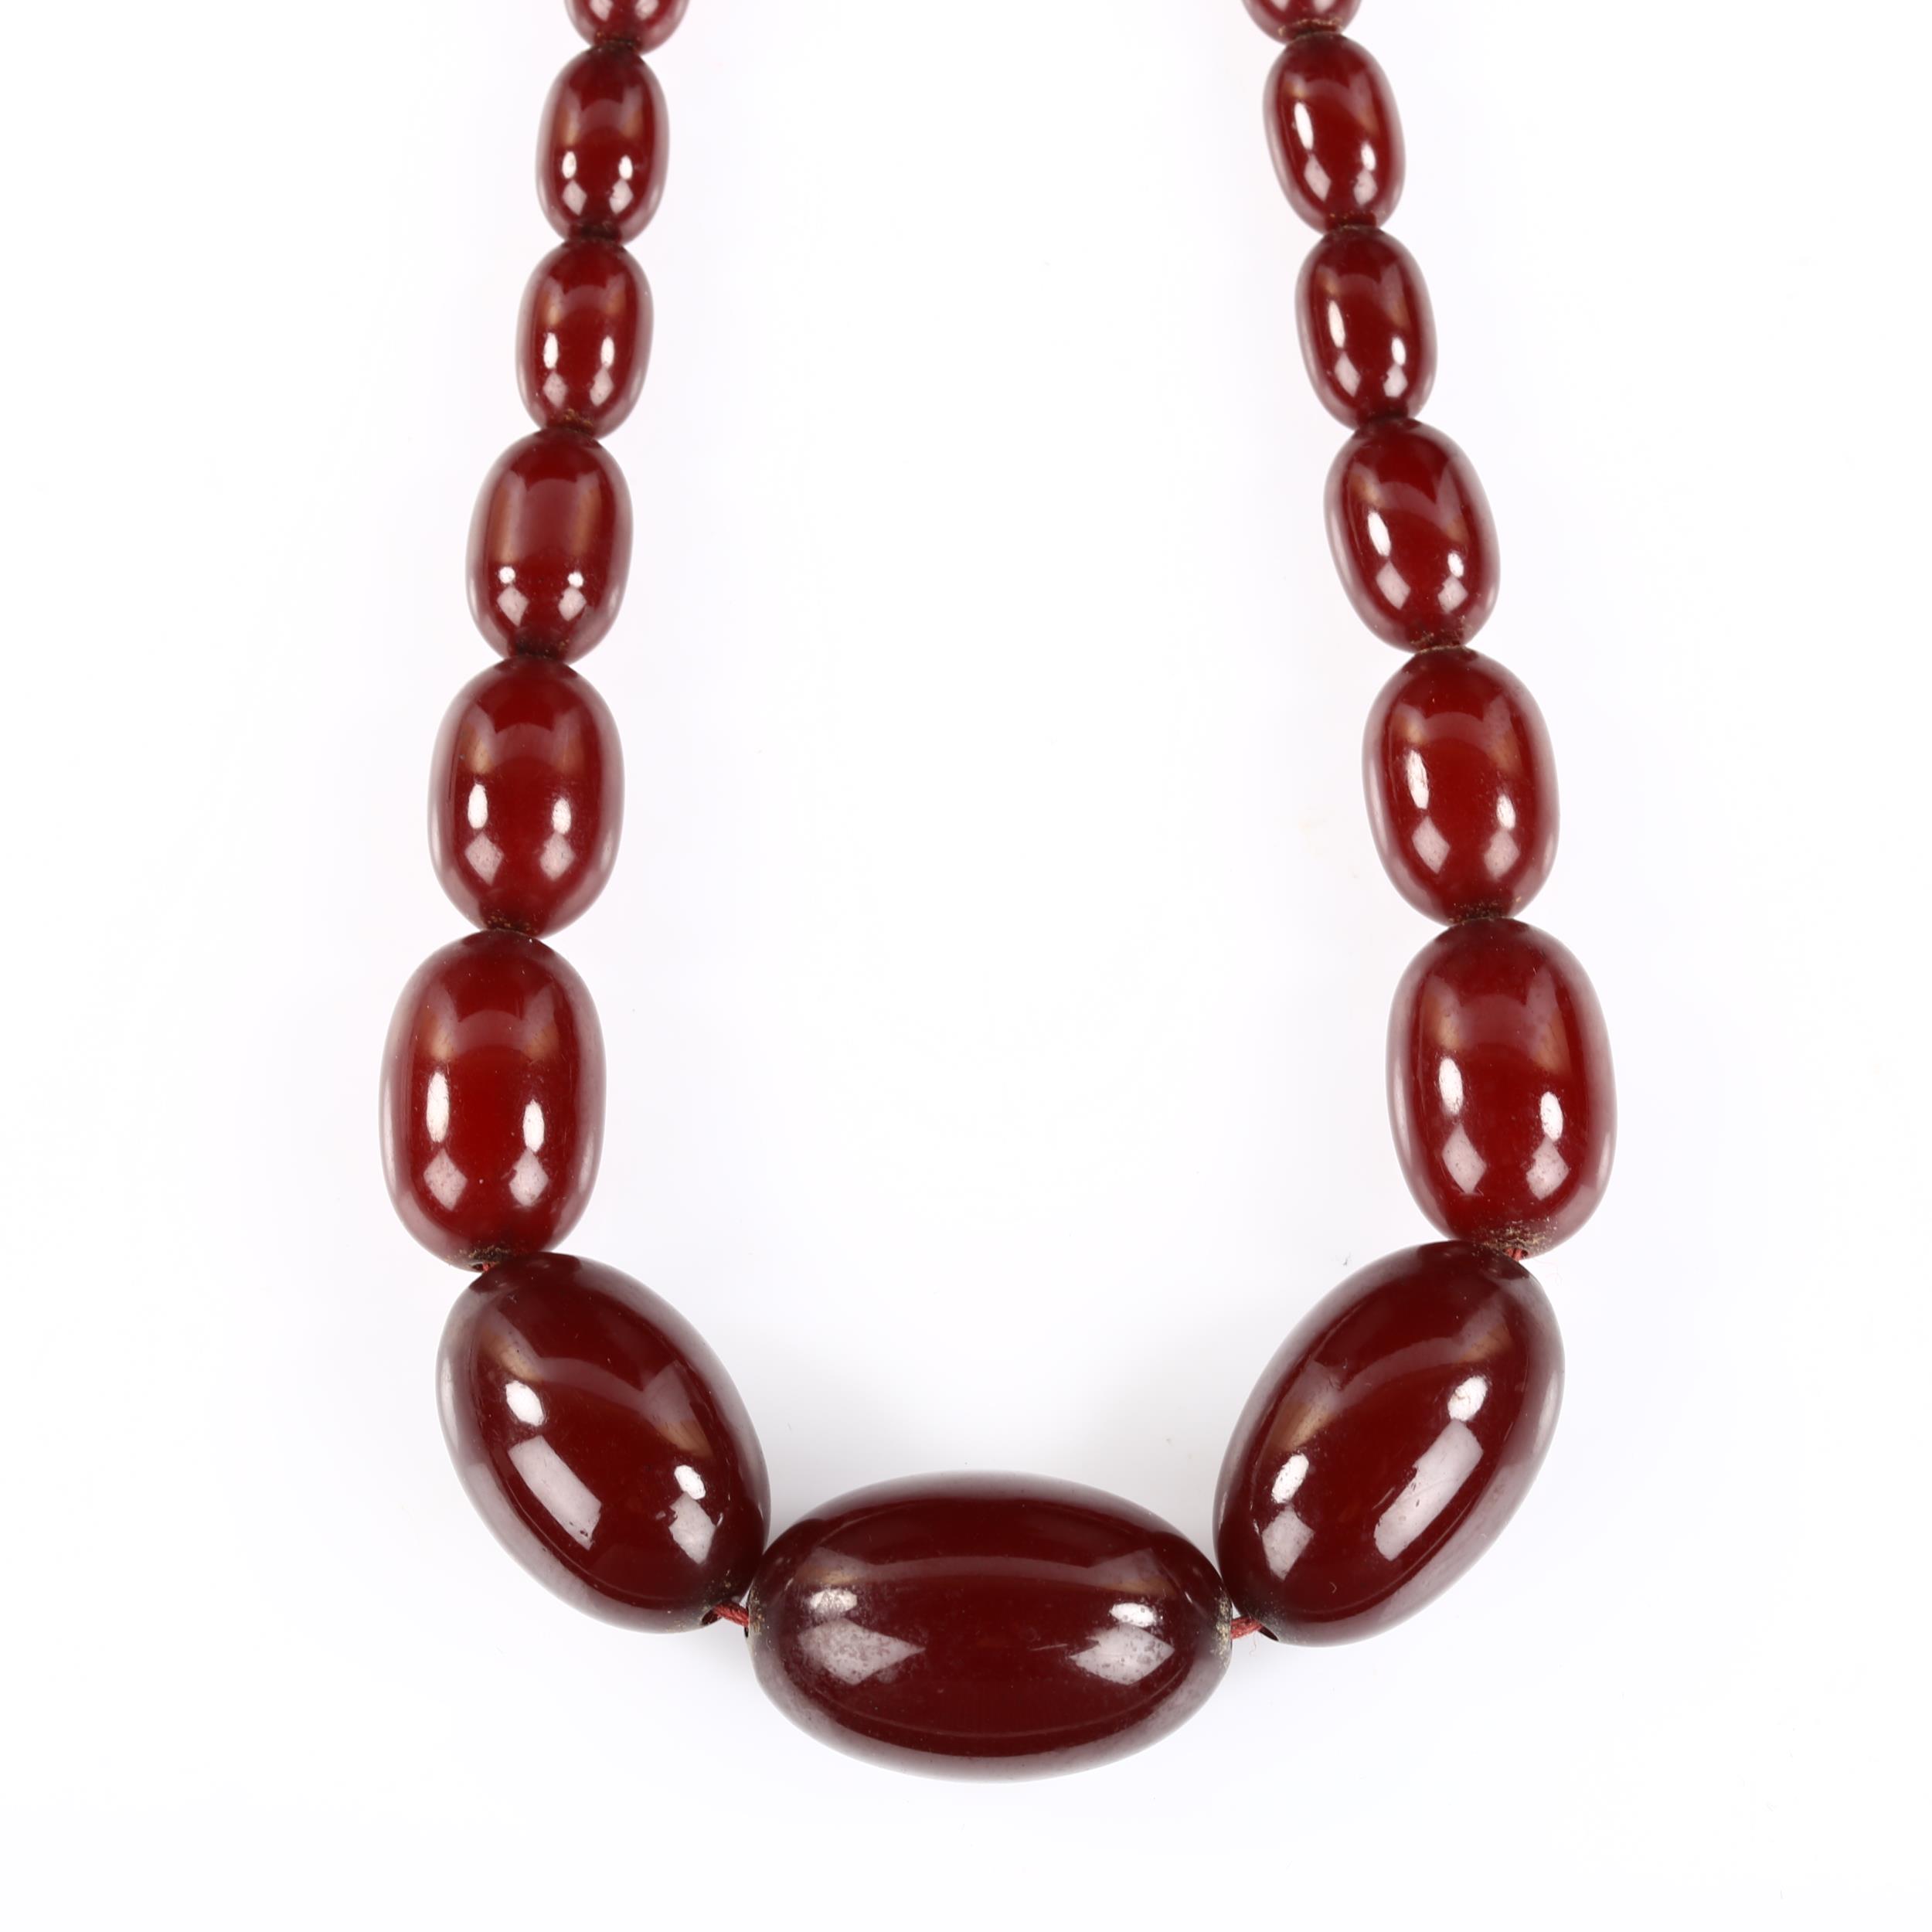 A single-strand graduated cherry amber bead necklace, bead lengths 11.5mm - 32.4mm, necklace